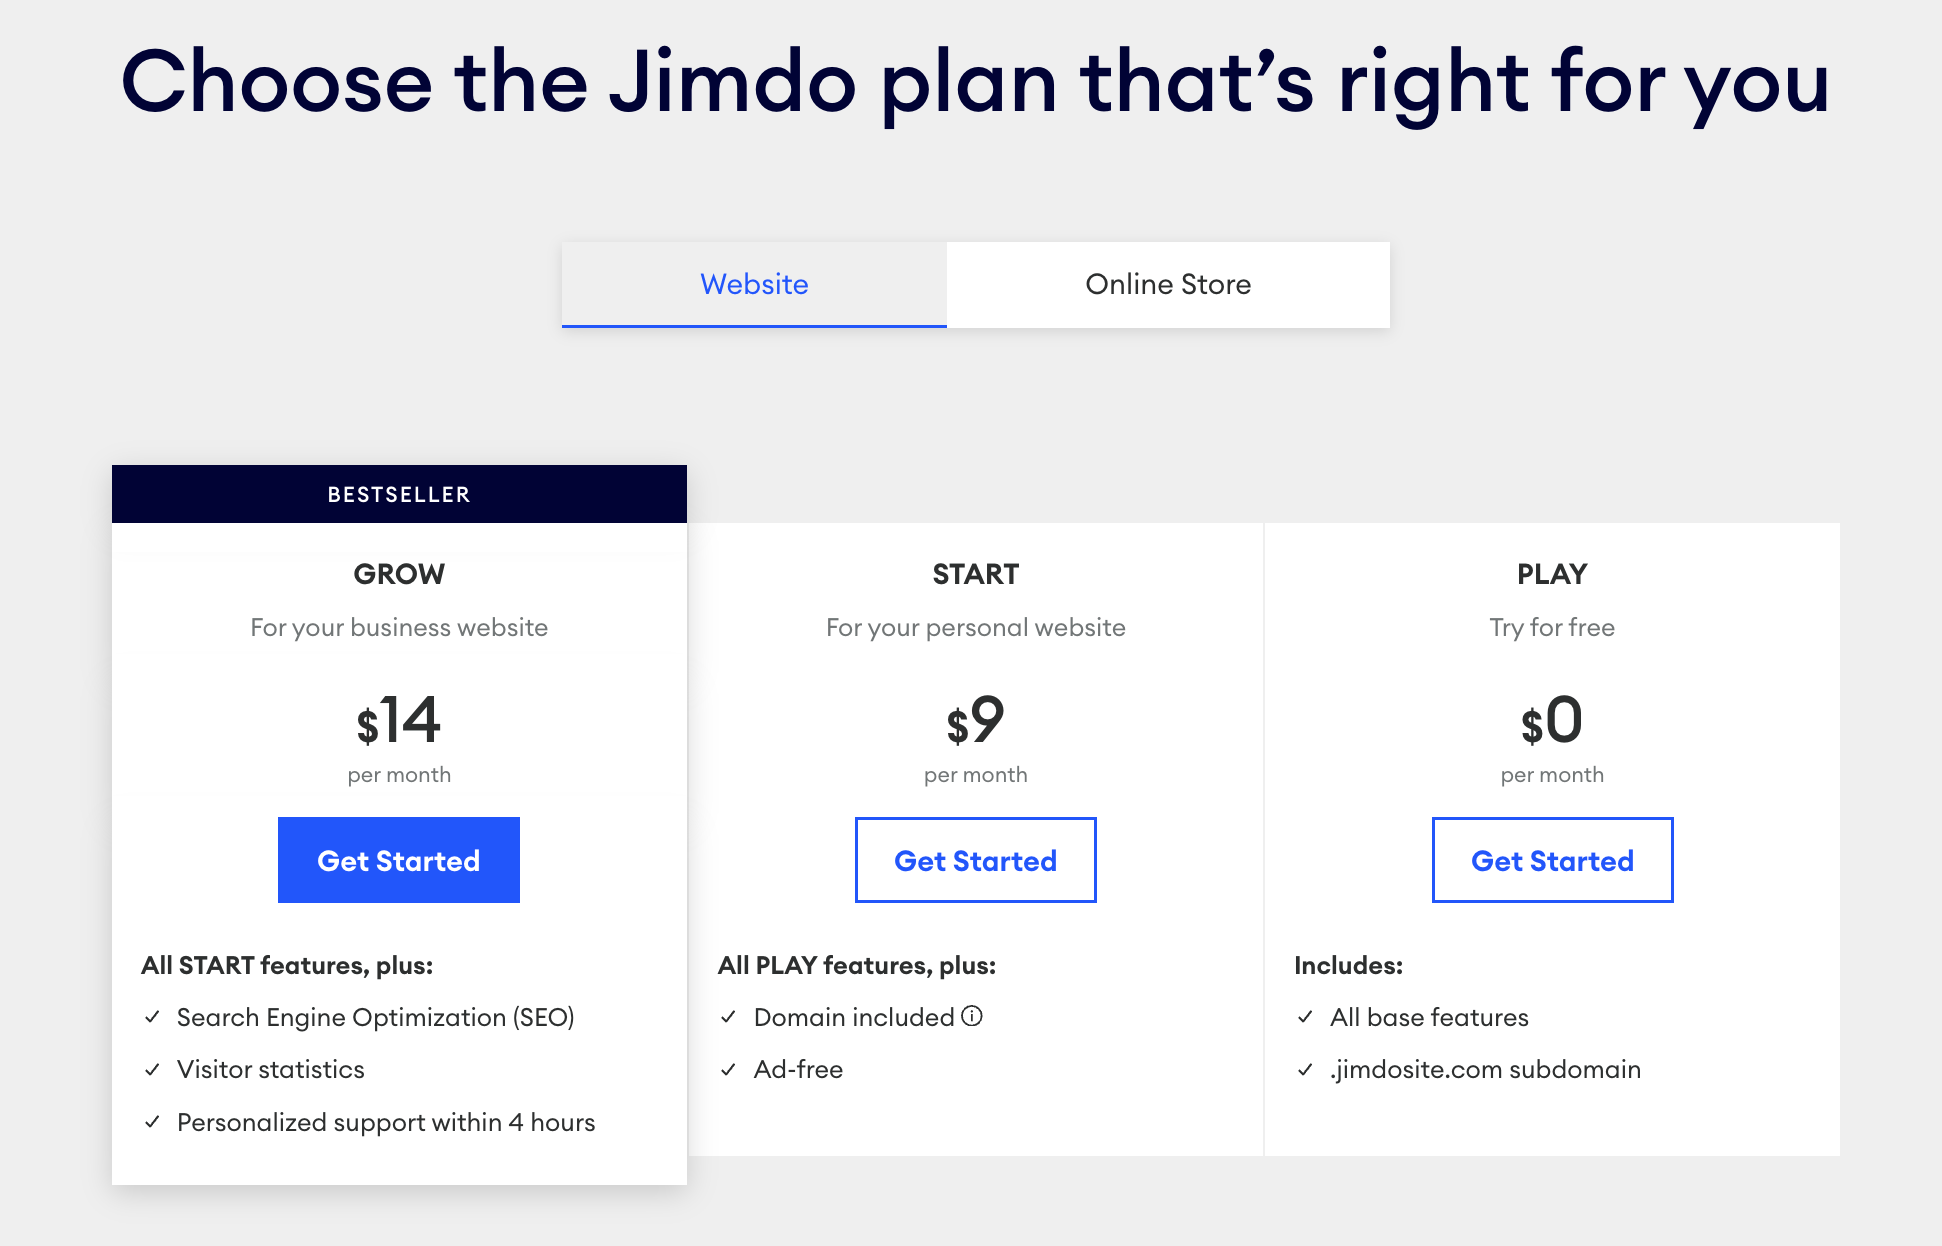 Jimdo's Pricing for Website services